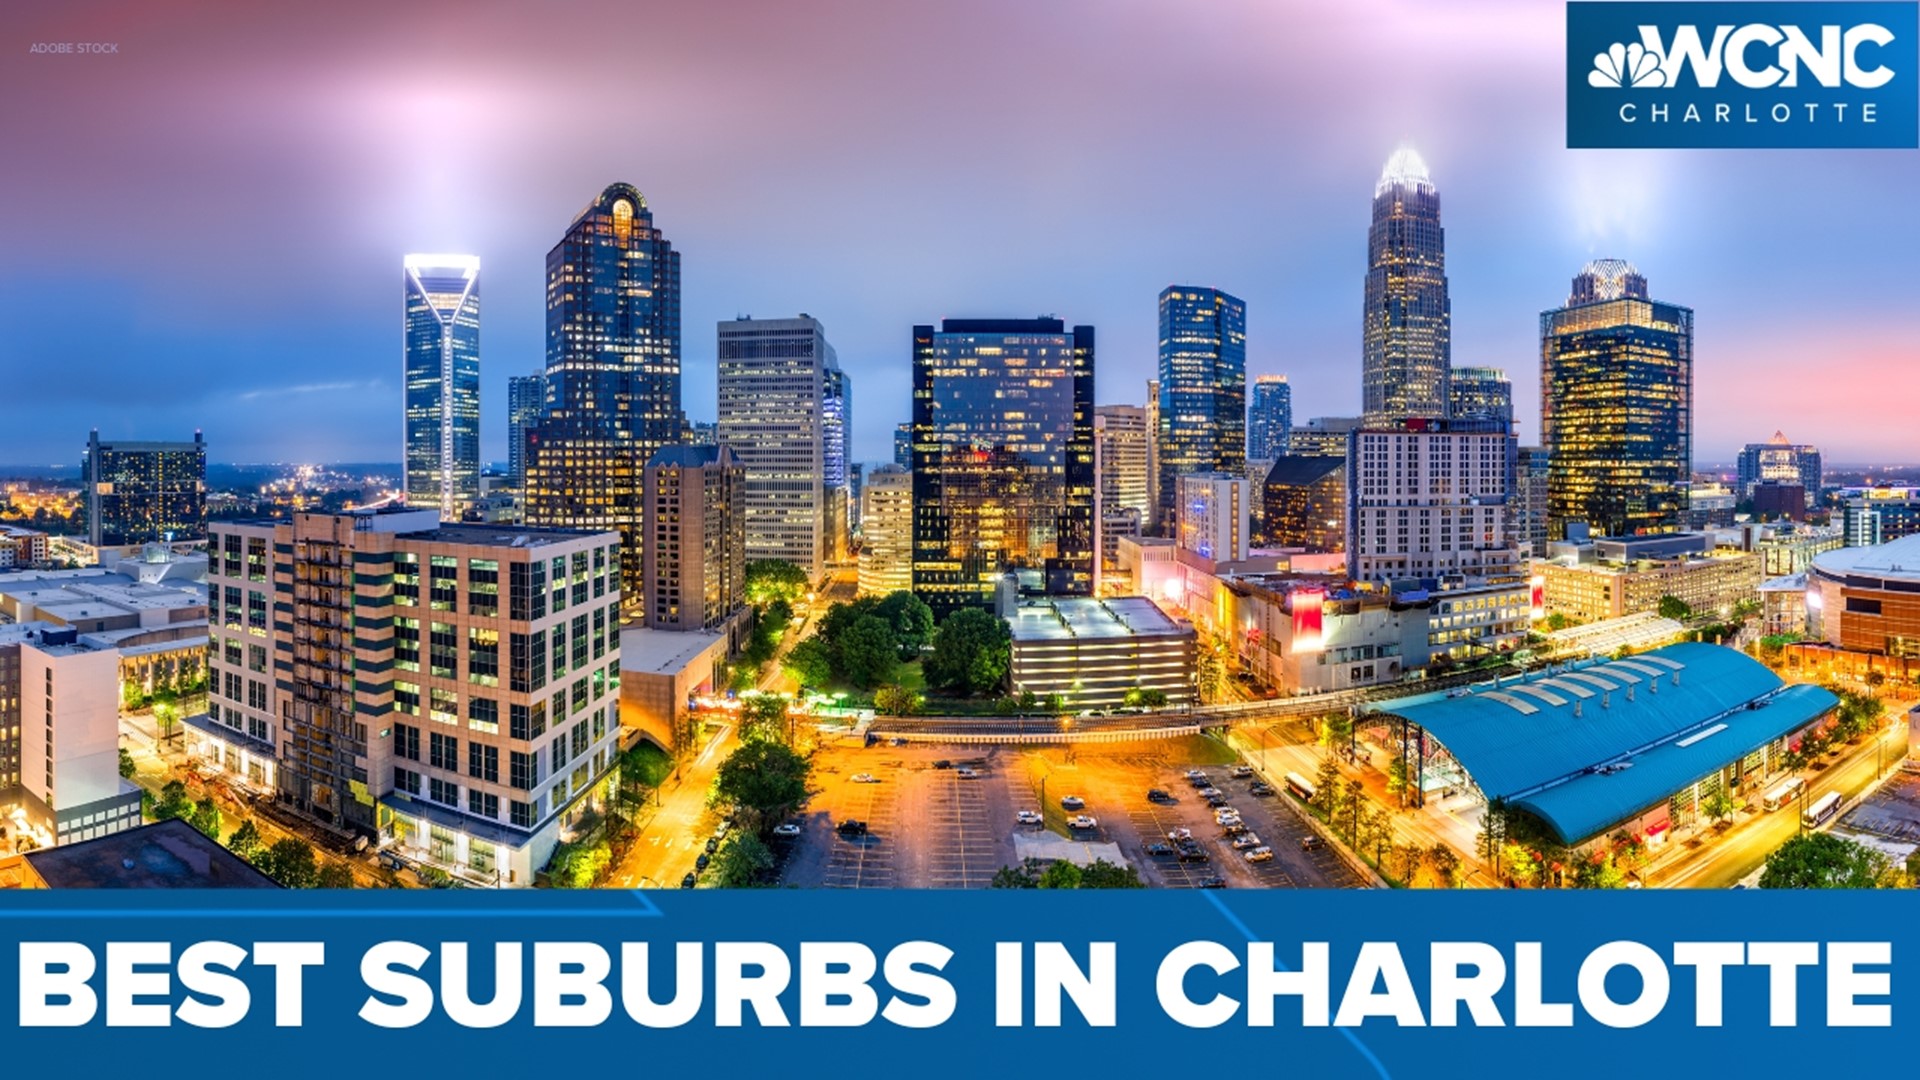 A new study shows which three suburbs near Charlotte are among the best in America.